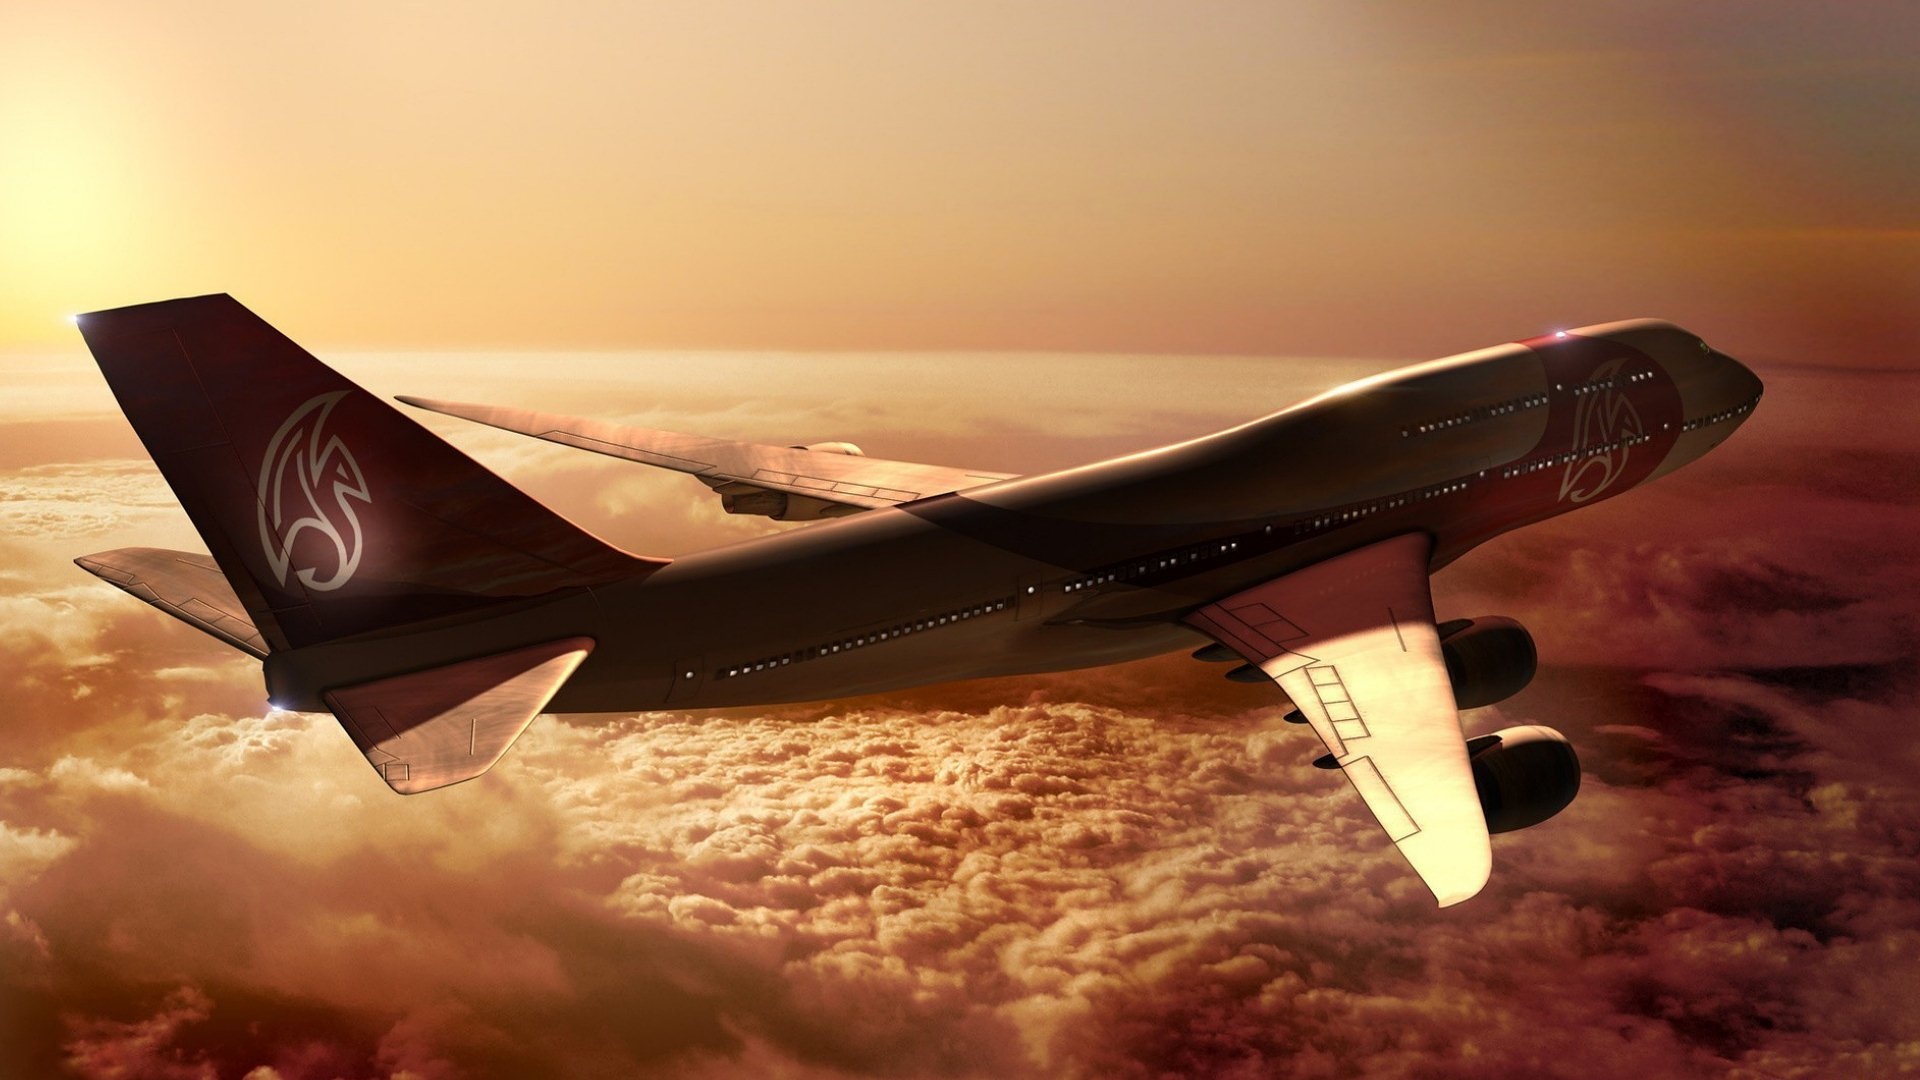 Boeing 747, Air travel excellence, Skybound adventure, Iconic jet, 1920x1080 Full HD Desktop